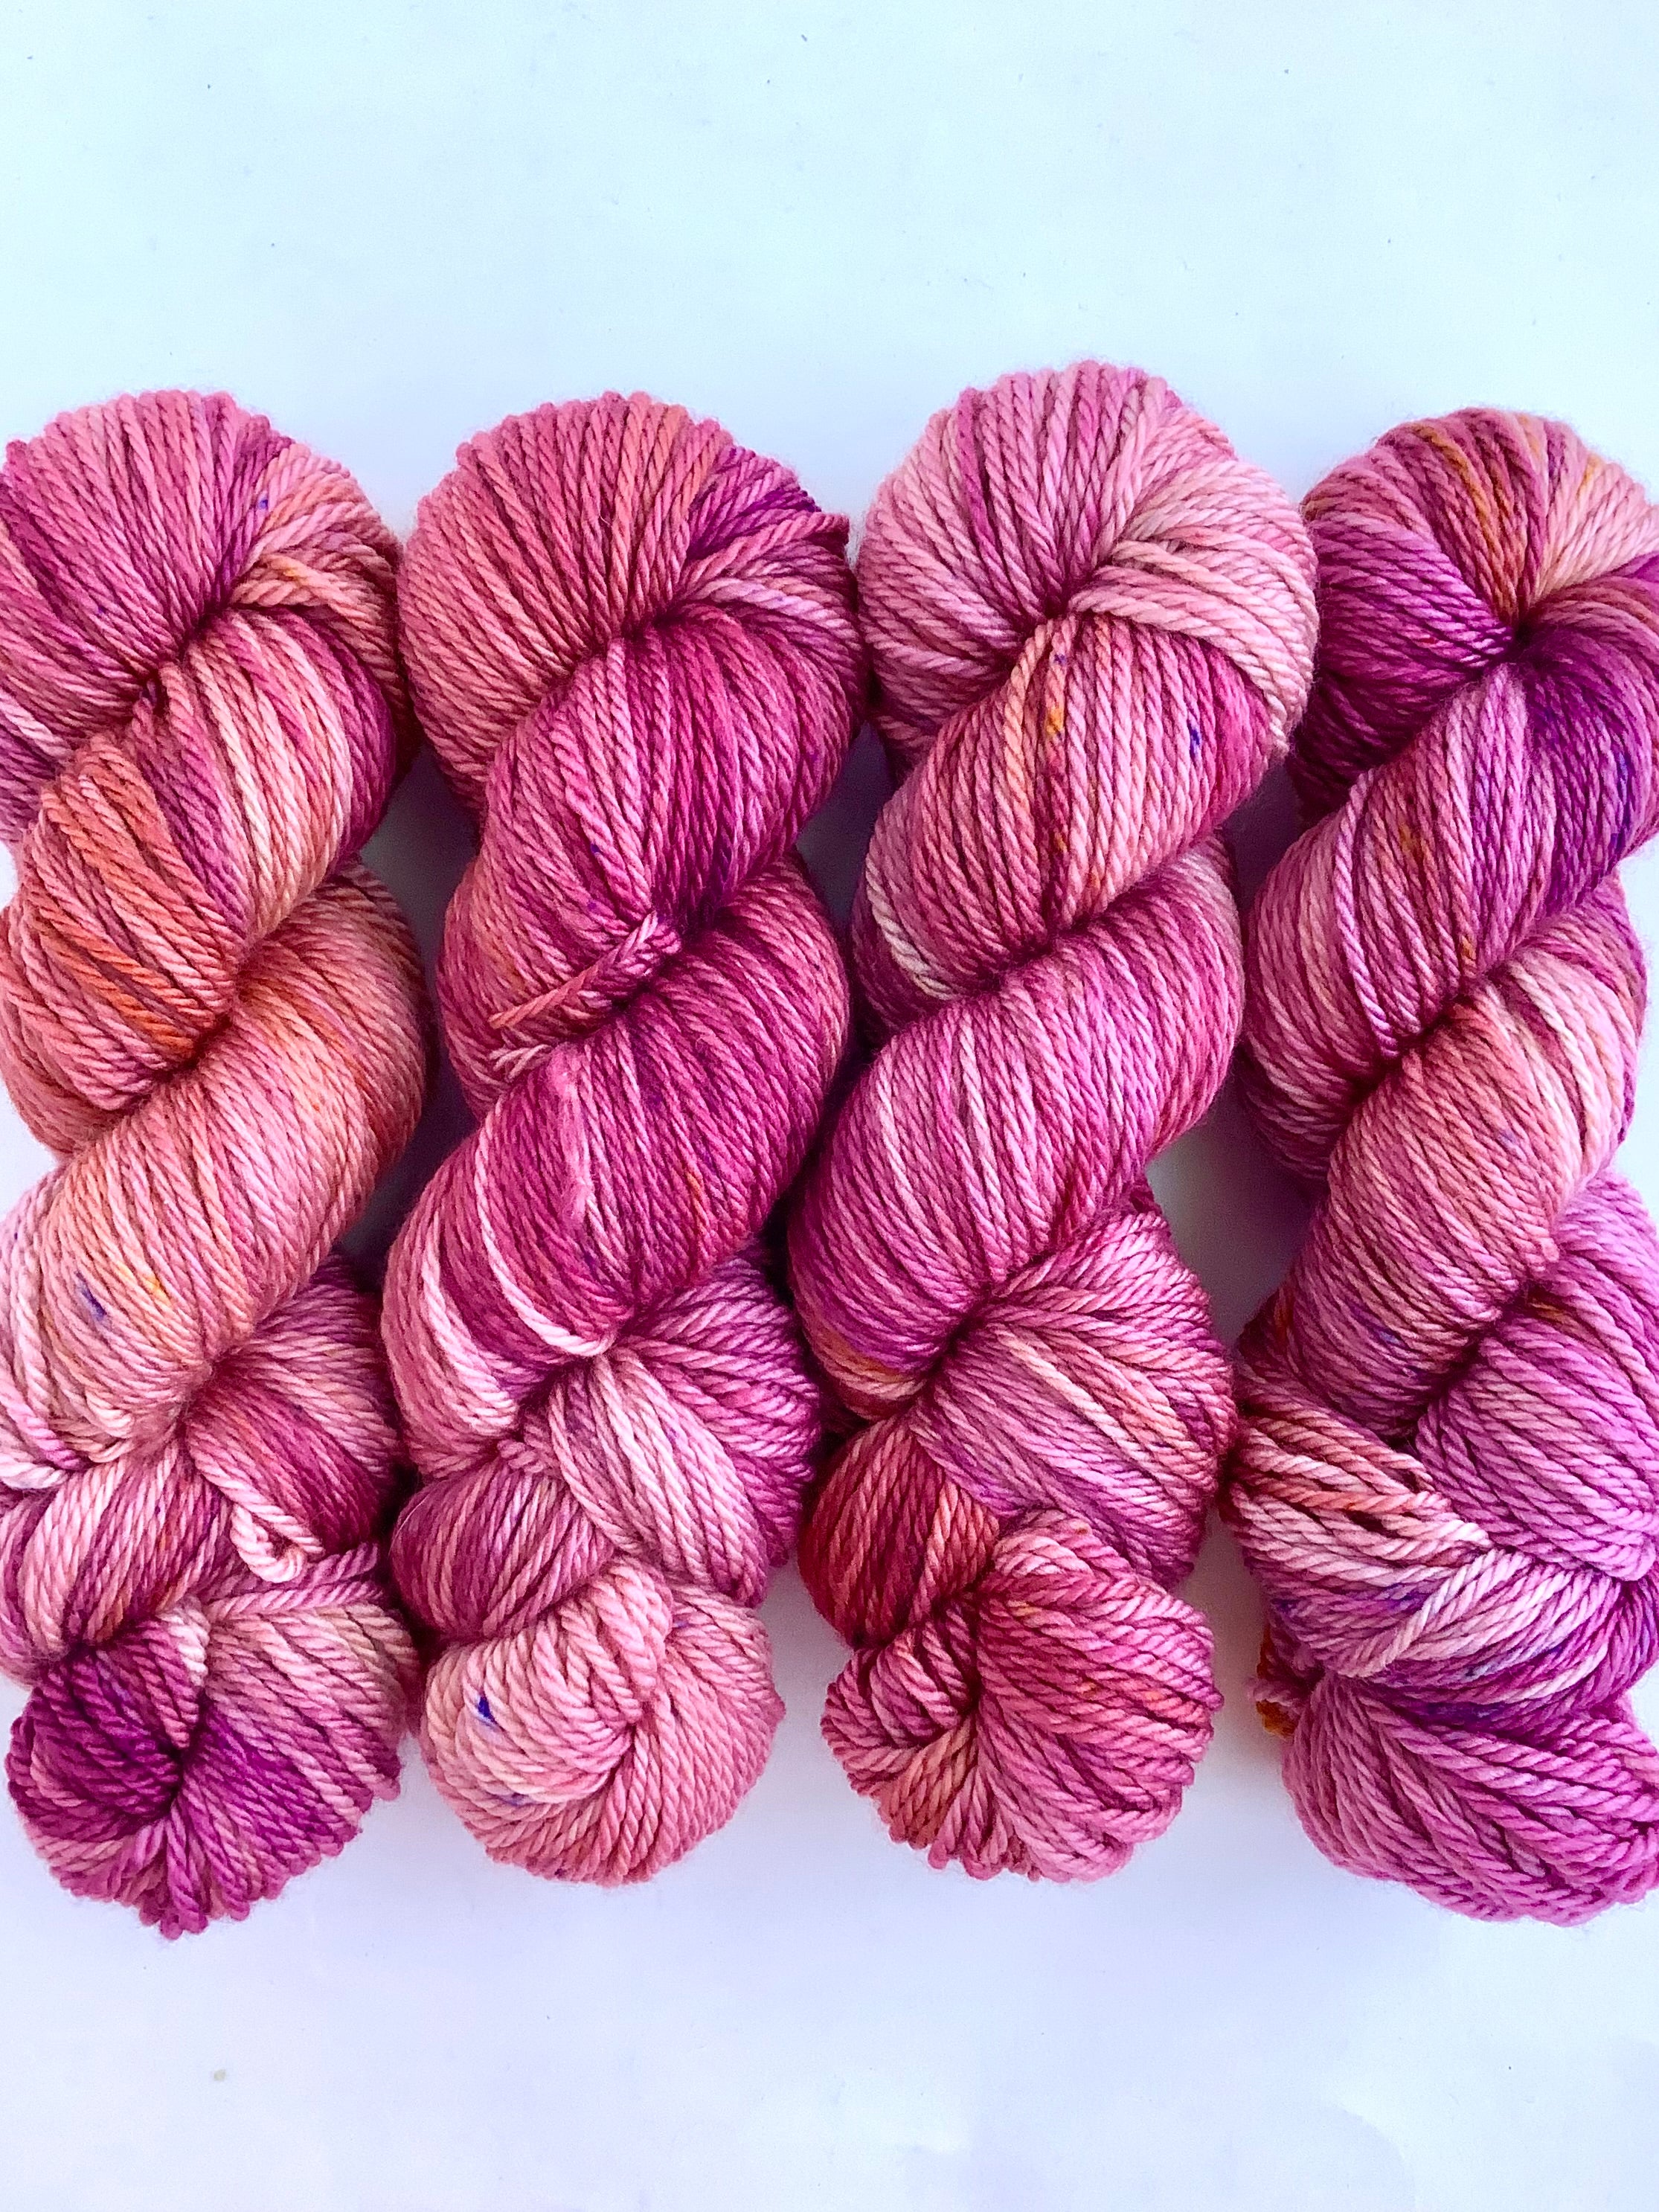 Orchard - Tributary Worsted